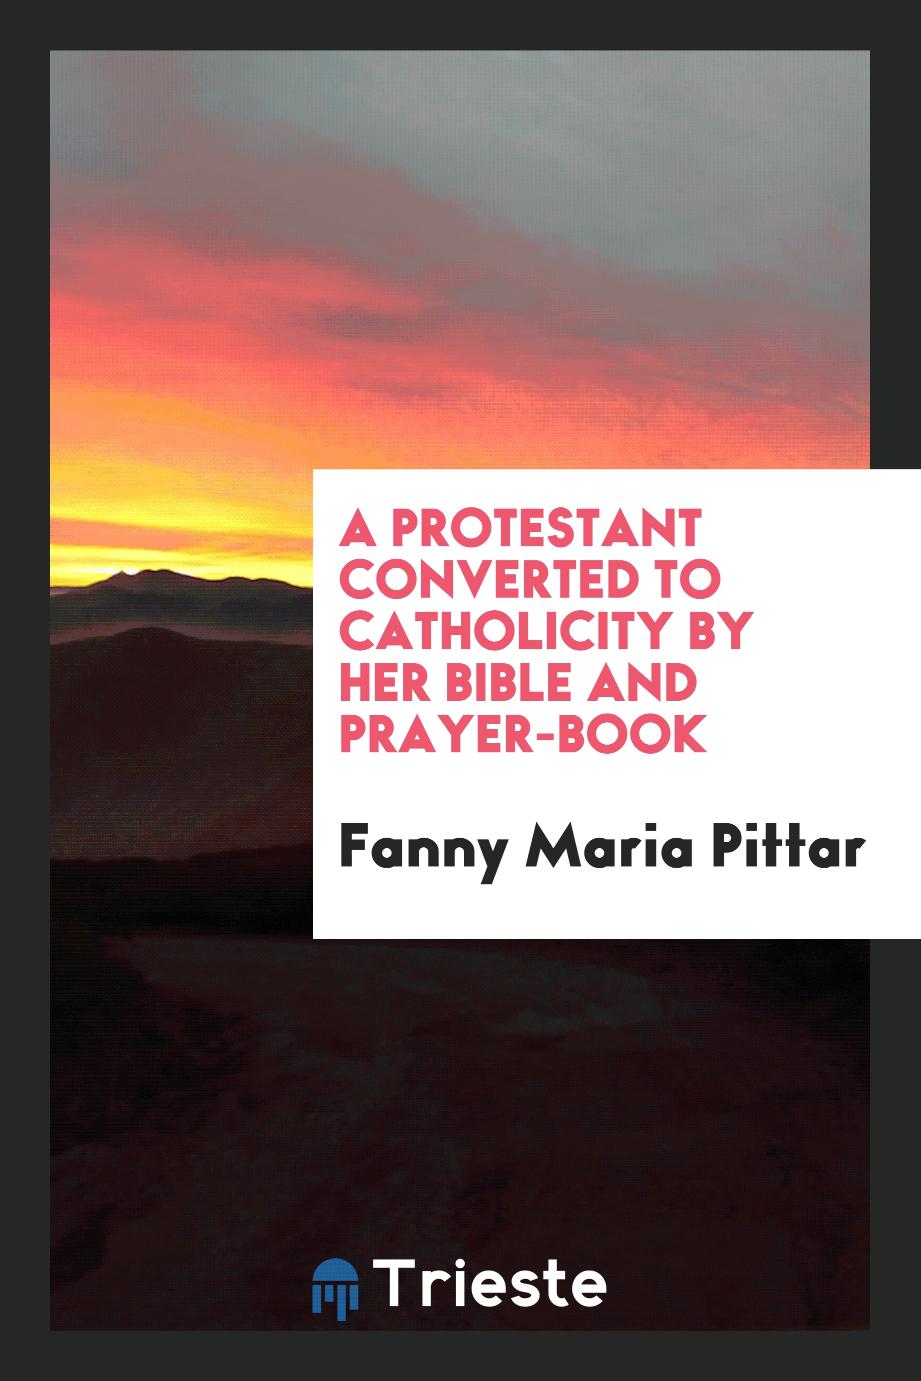 A protestant converted to Catholicity by her bible and prayer-book